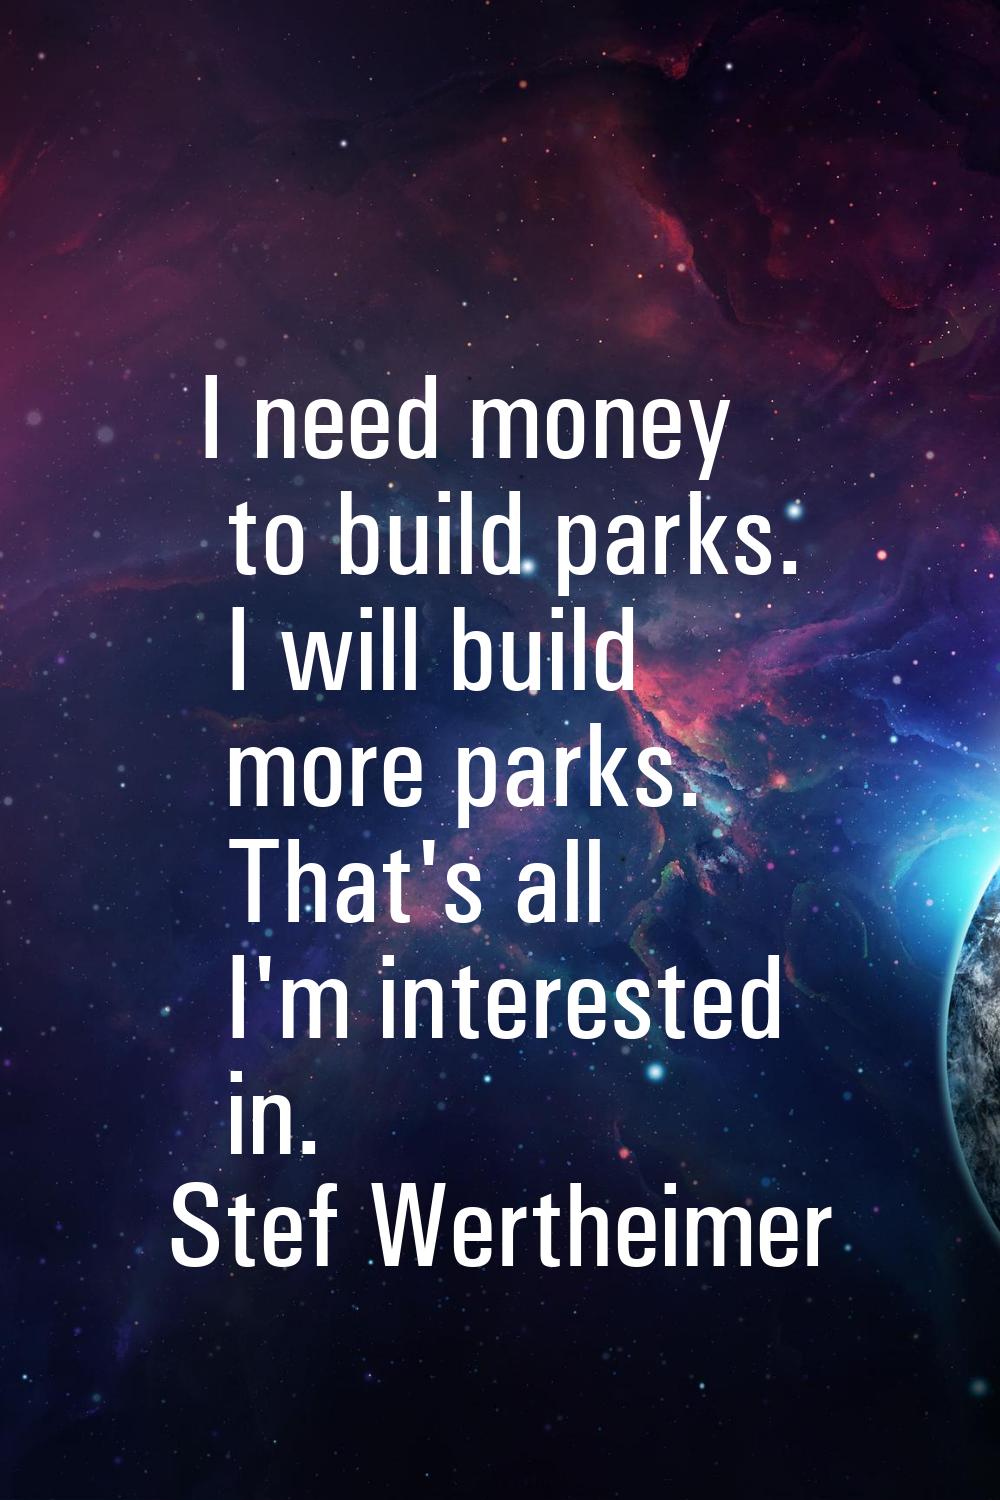 I need money to build parks. I will build more parks. That's all I'm interested in.